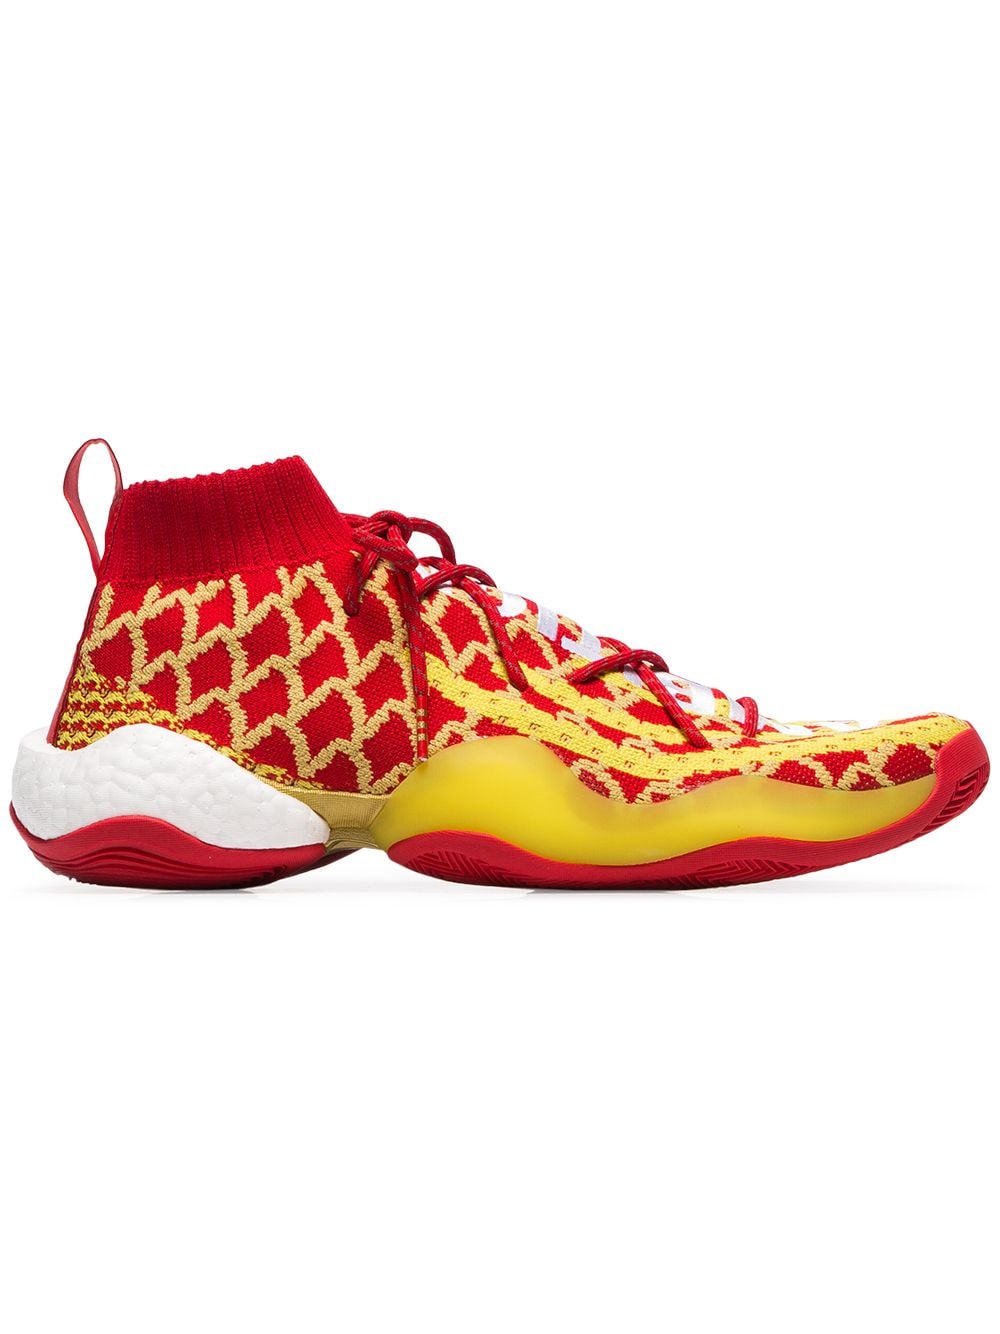 adidas x Pharrell Williams Crazy BYW "Chinese New Year" sneakers - Red von adidas